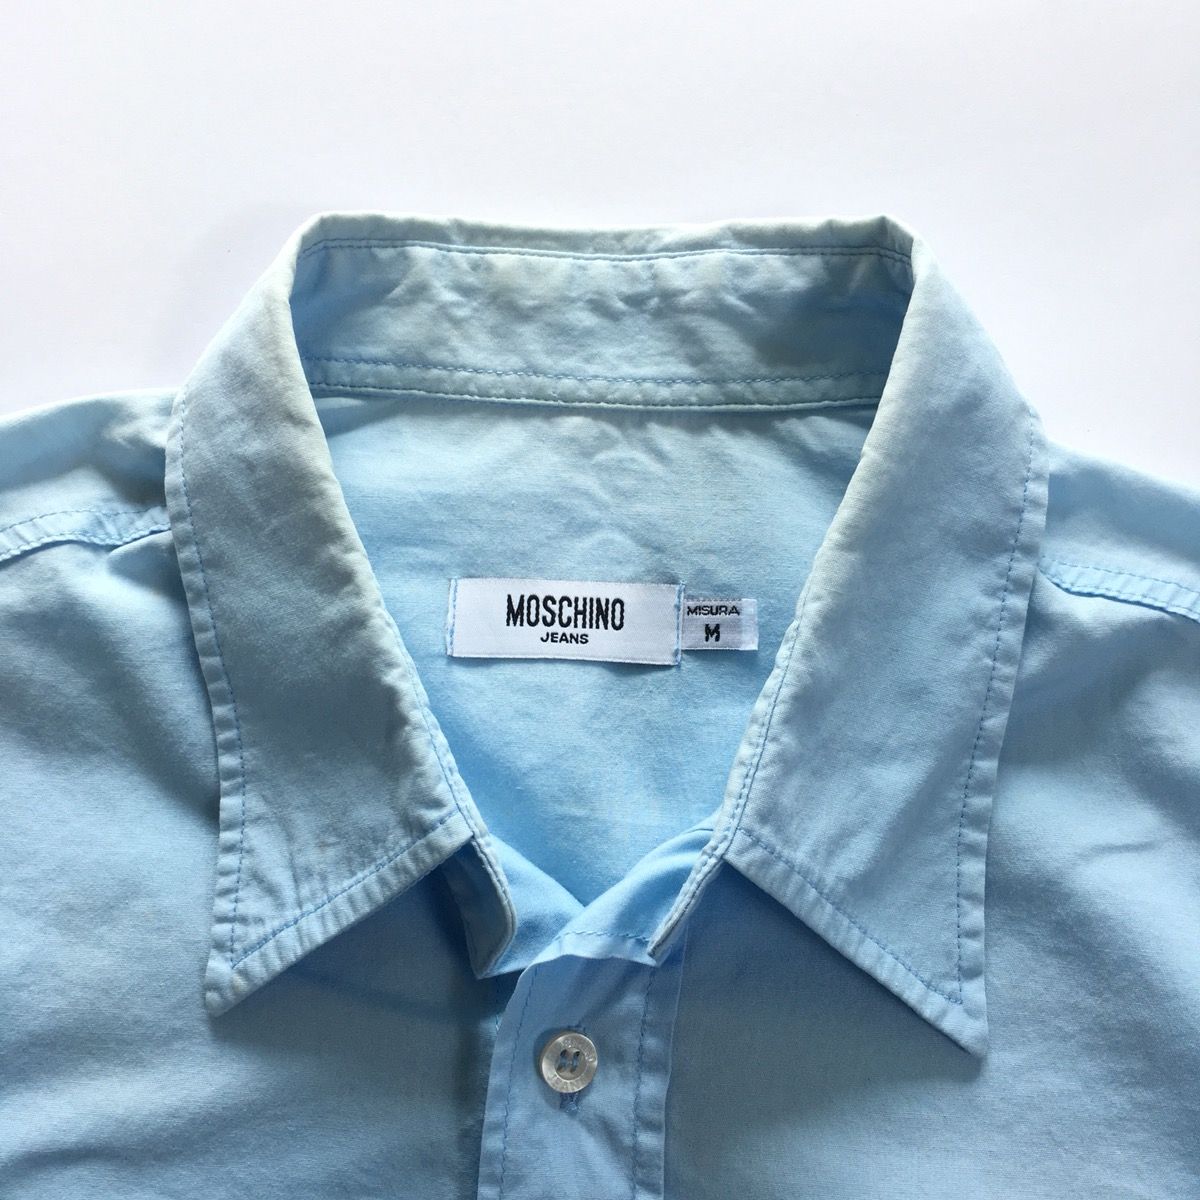 Moschino Jeans Rally 31 Button Shirt - 3